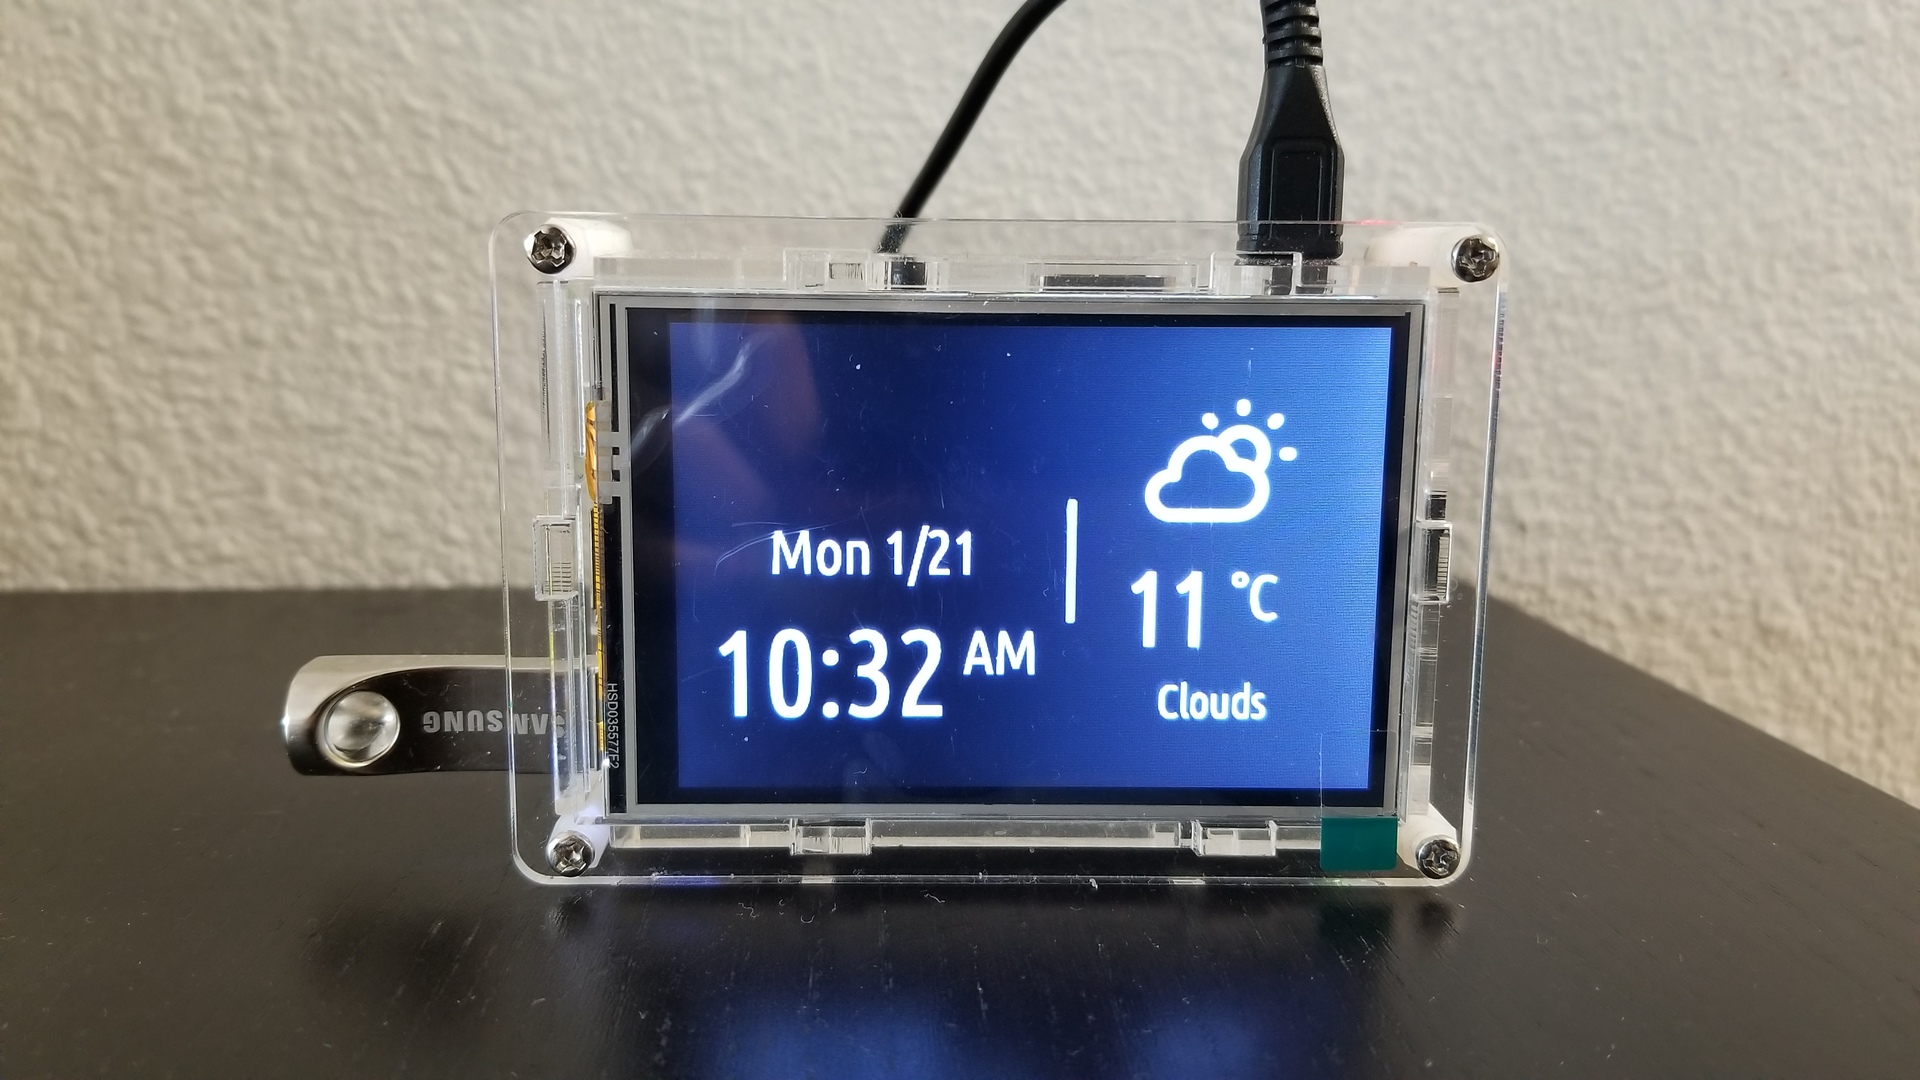 In a previous article, I explained how I set up a TFT LCD screen on my Raspberry Pi. Because I had been previously using my Pi as a headless server, I